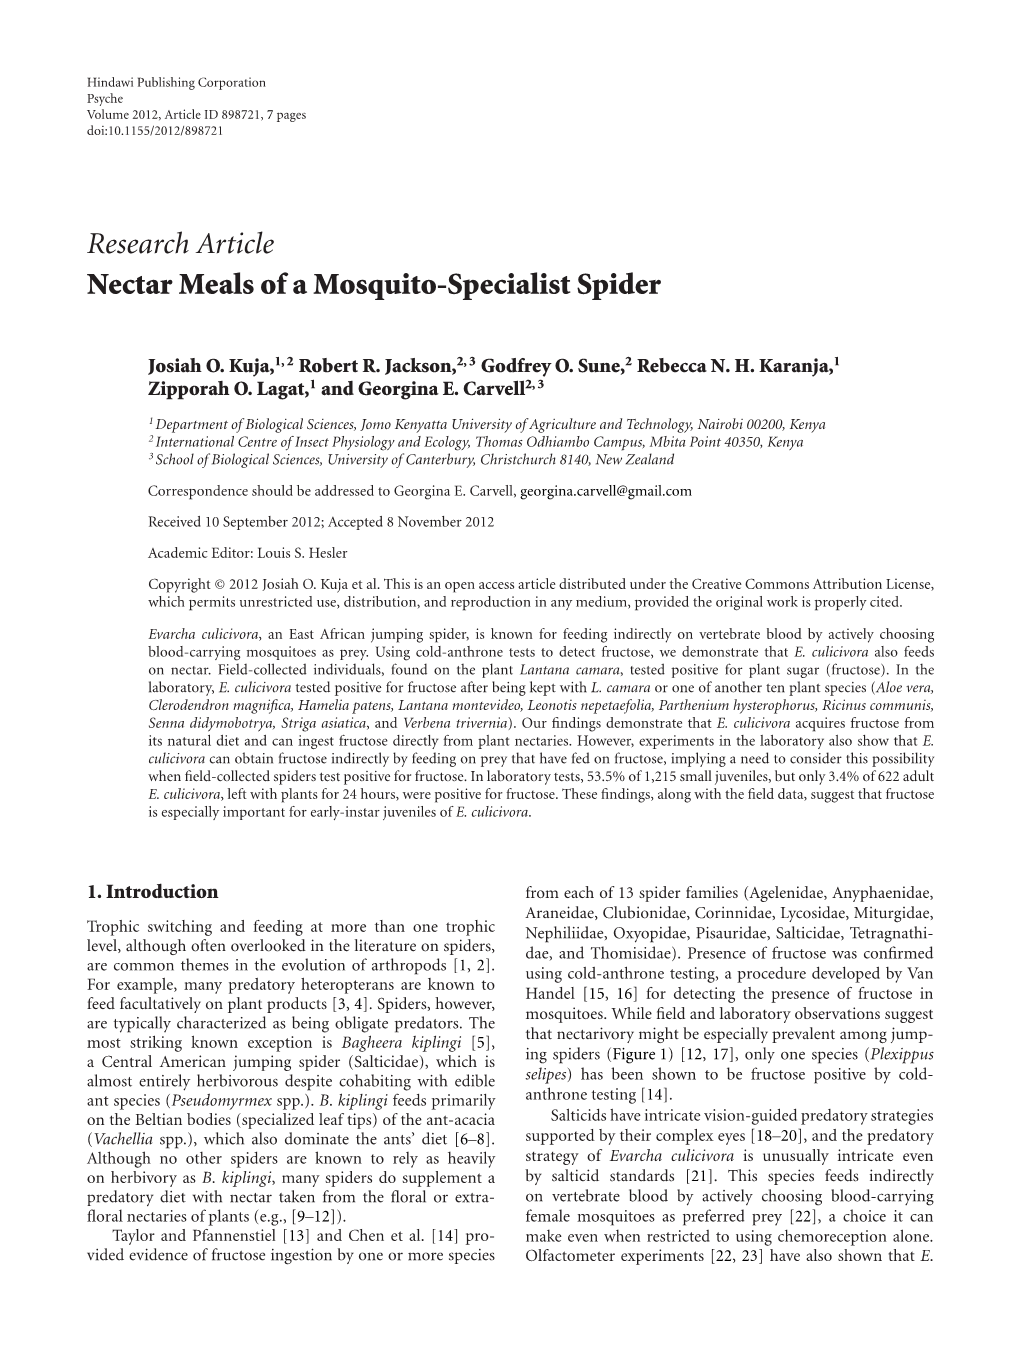 Nectar Meals of a Mosquito-Specialist Spider